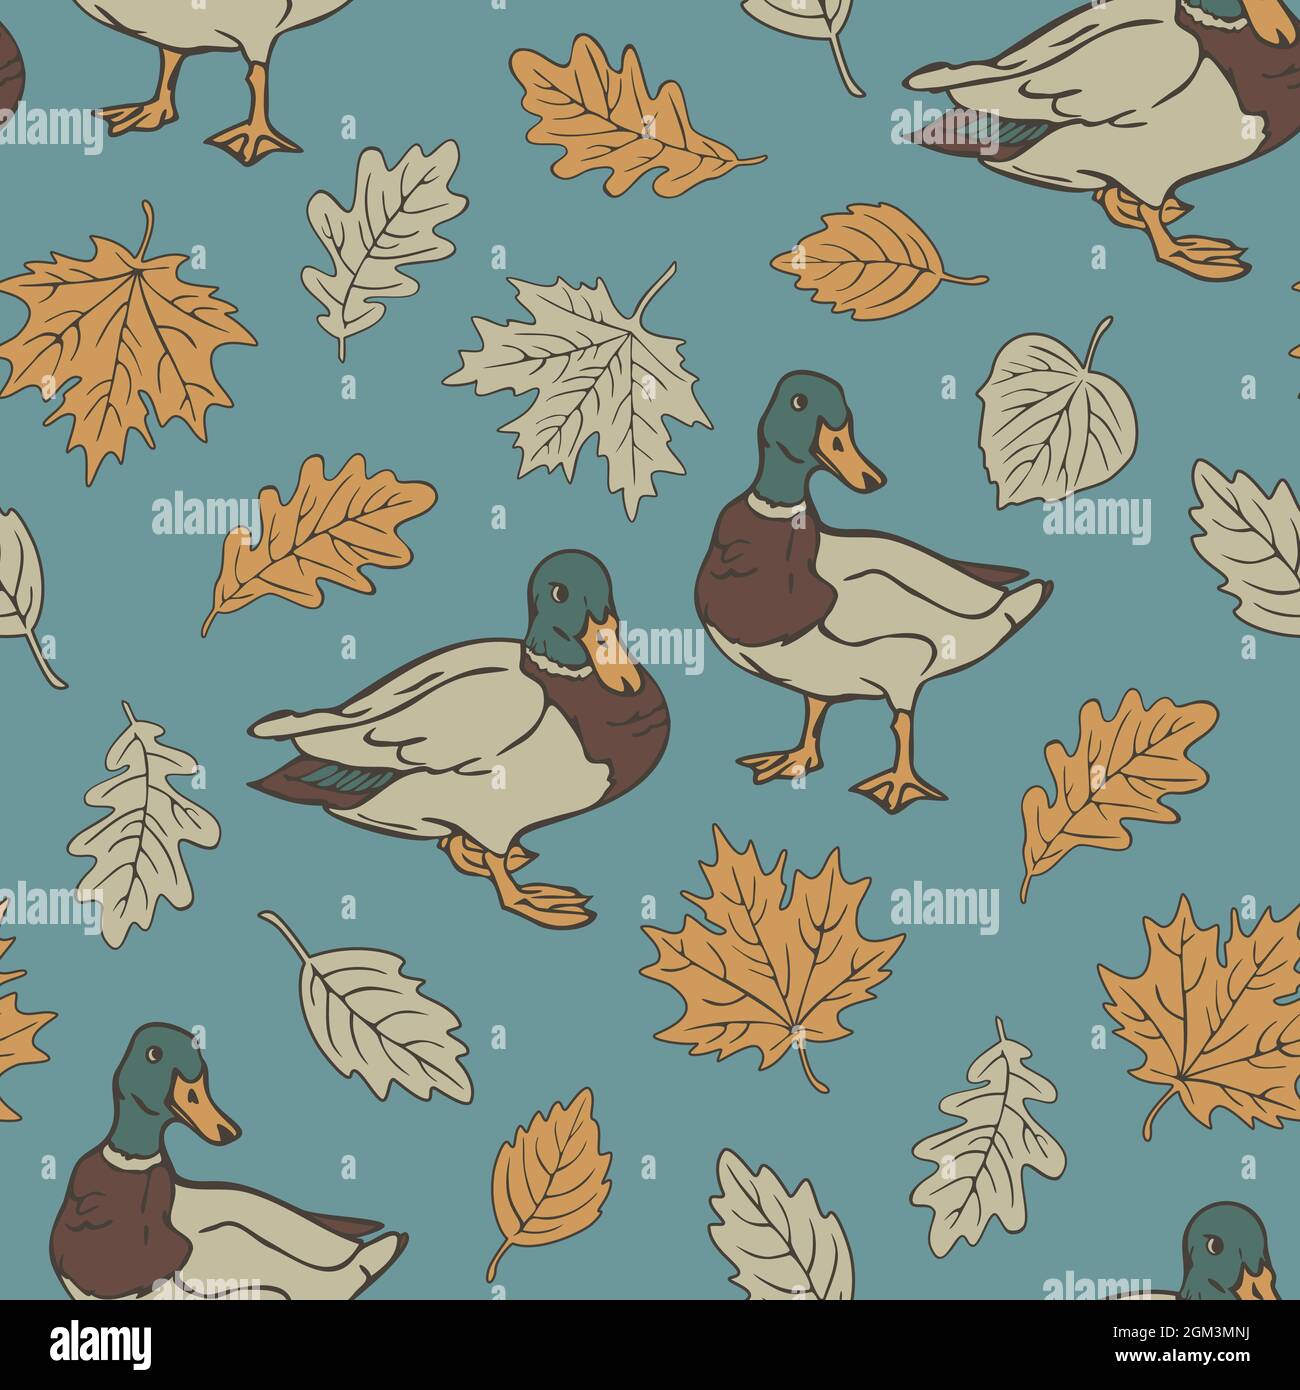 Vector seamless pattern with wild ducks and autumn leaves. Design with drakes and leaf fall on blue background. Stock Vector